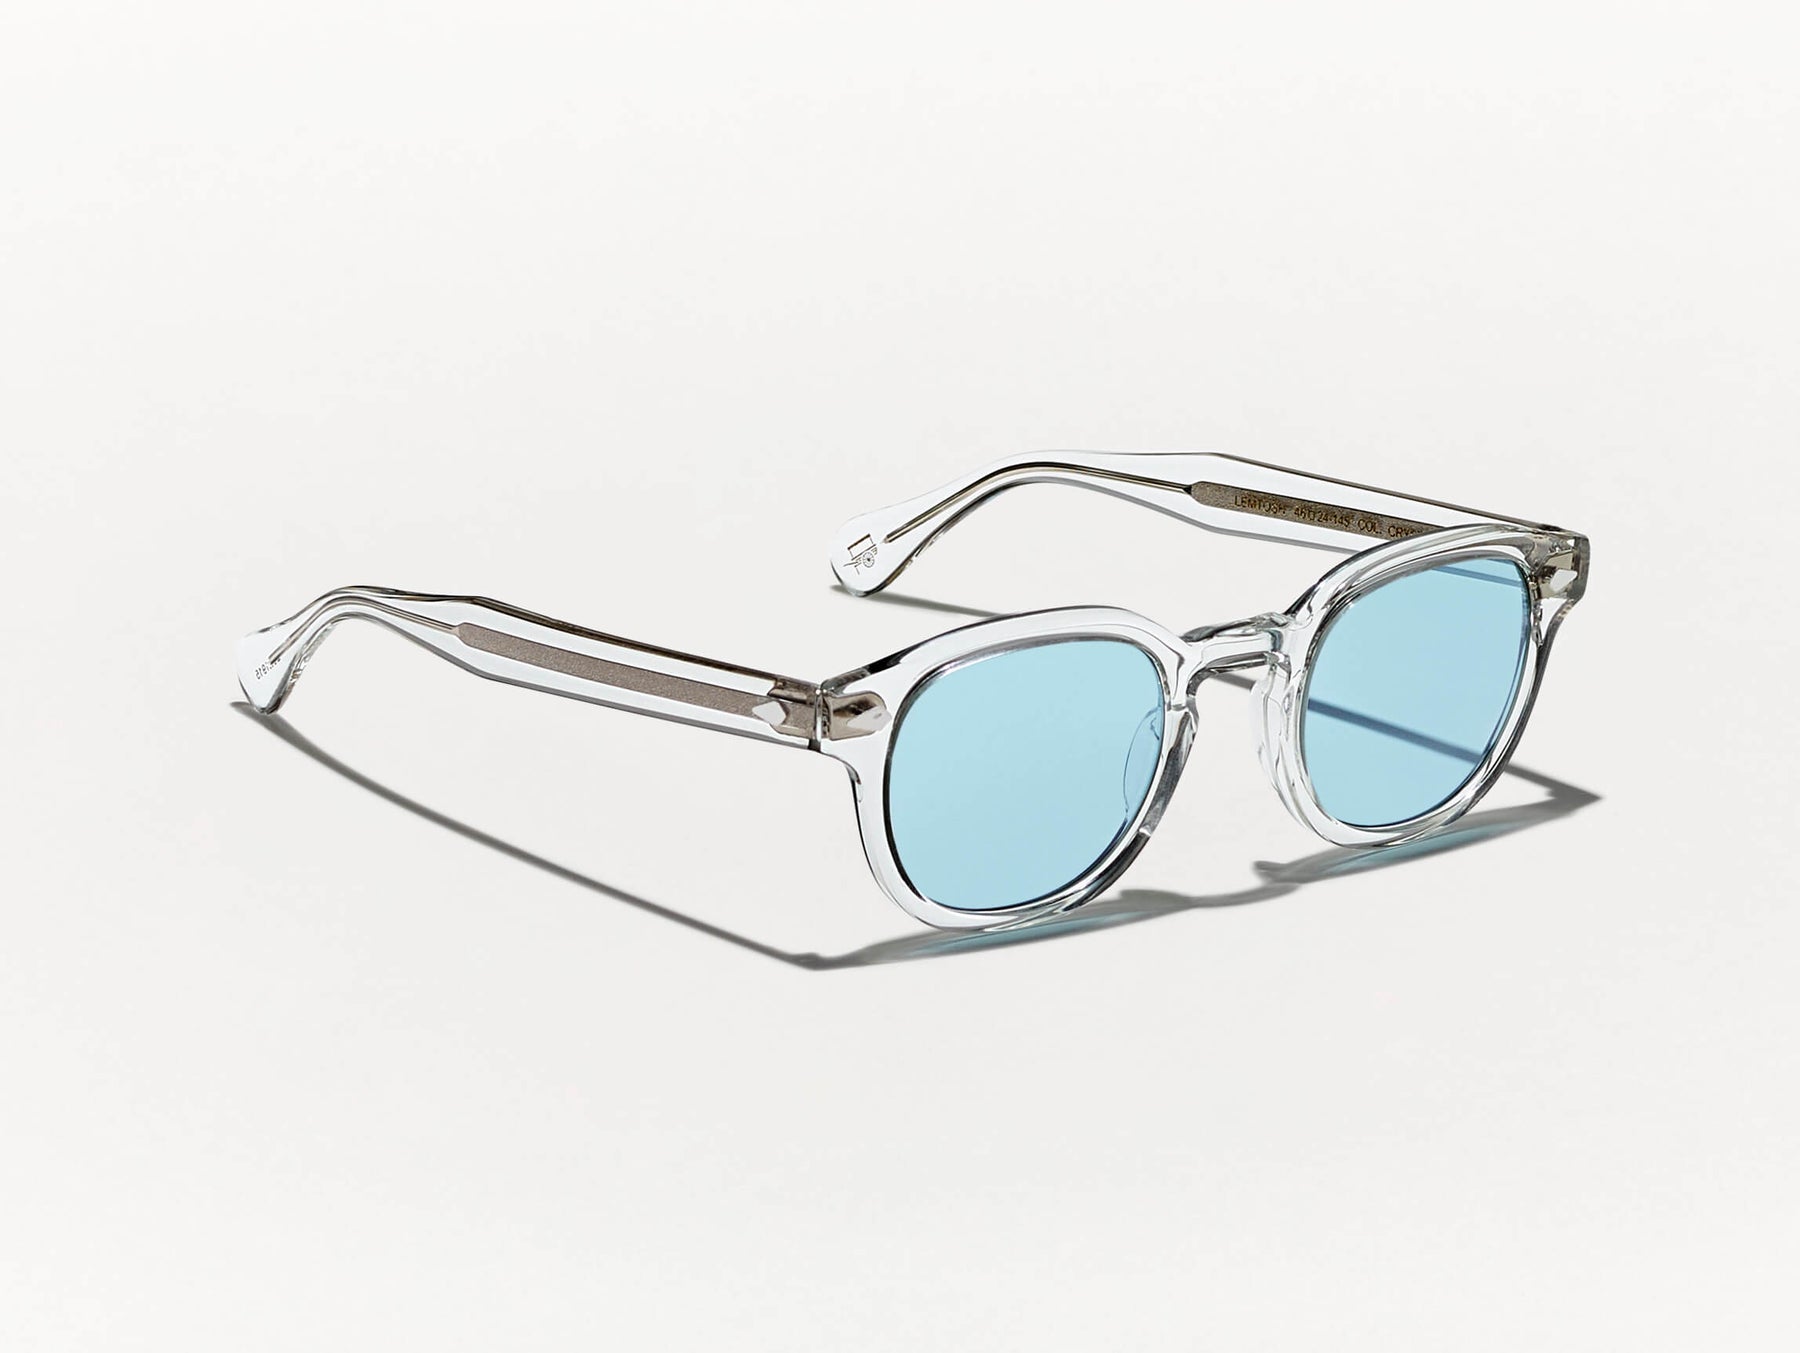 The LEMTOSH SUN in Crystal with DG-37 Blue Glass Lenses